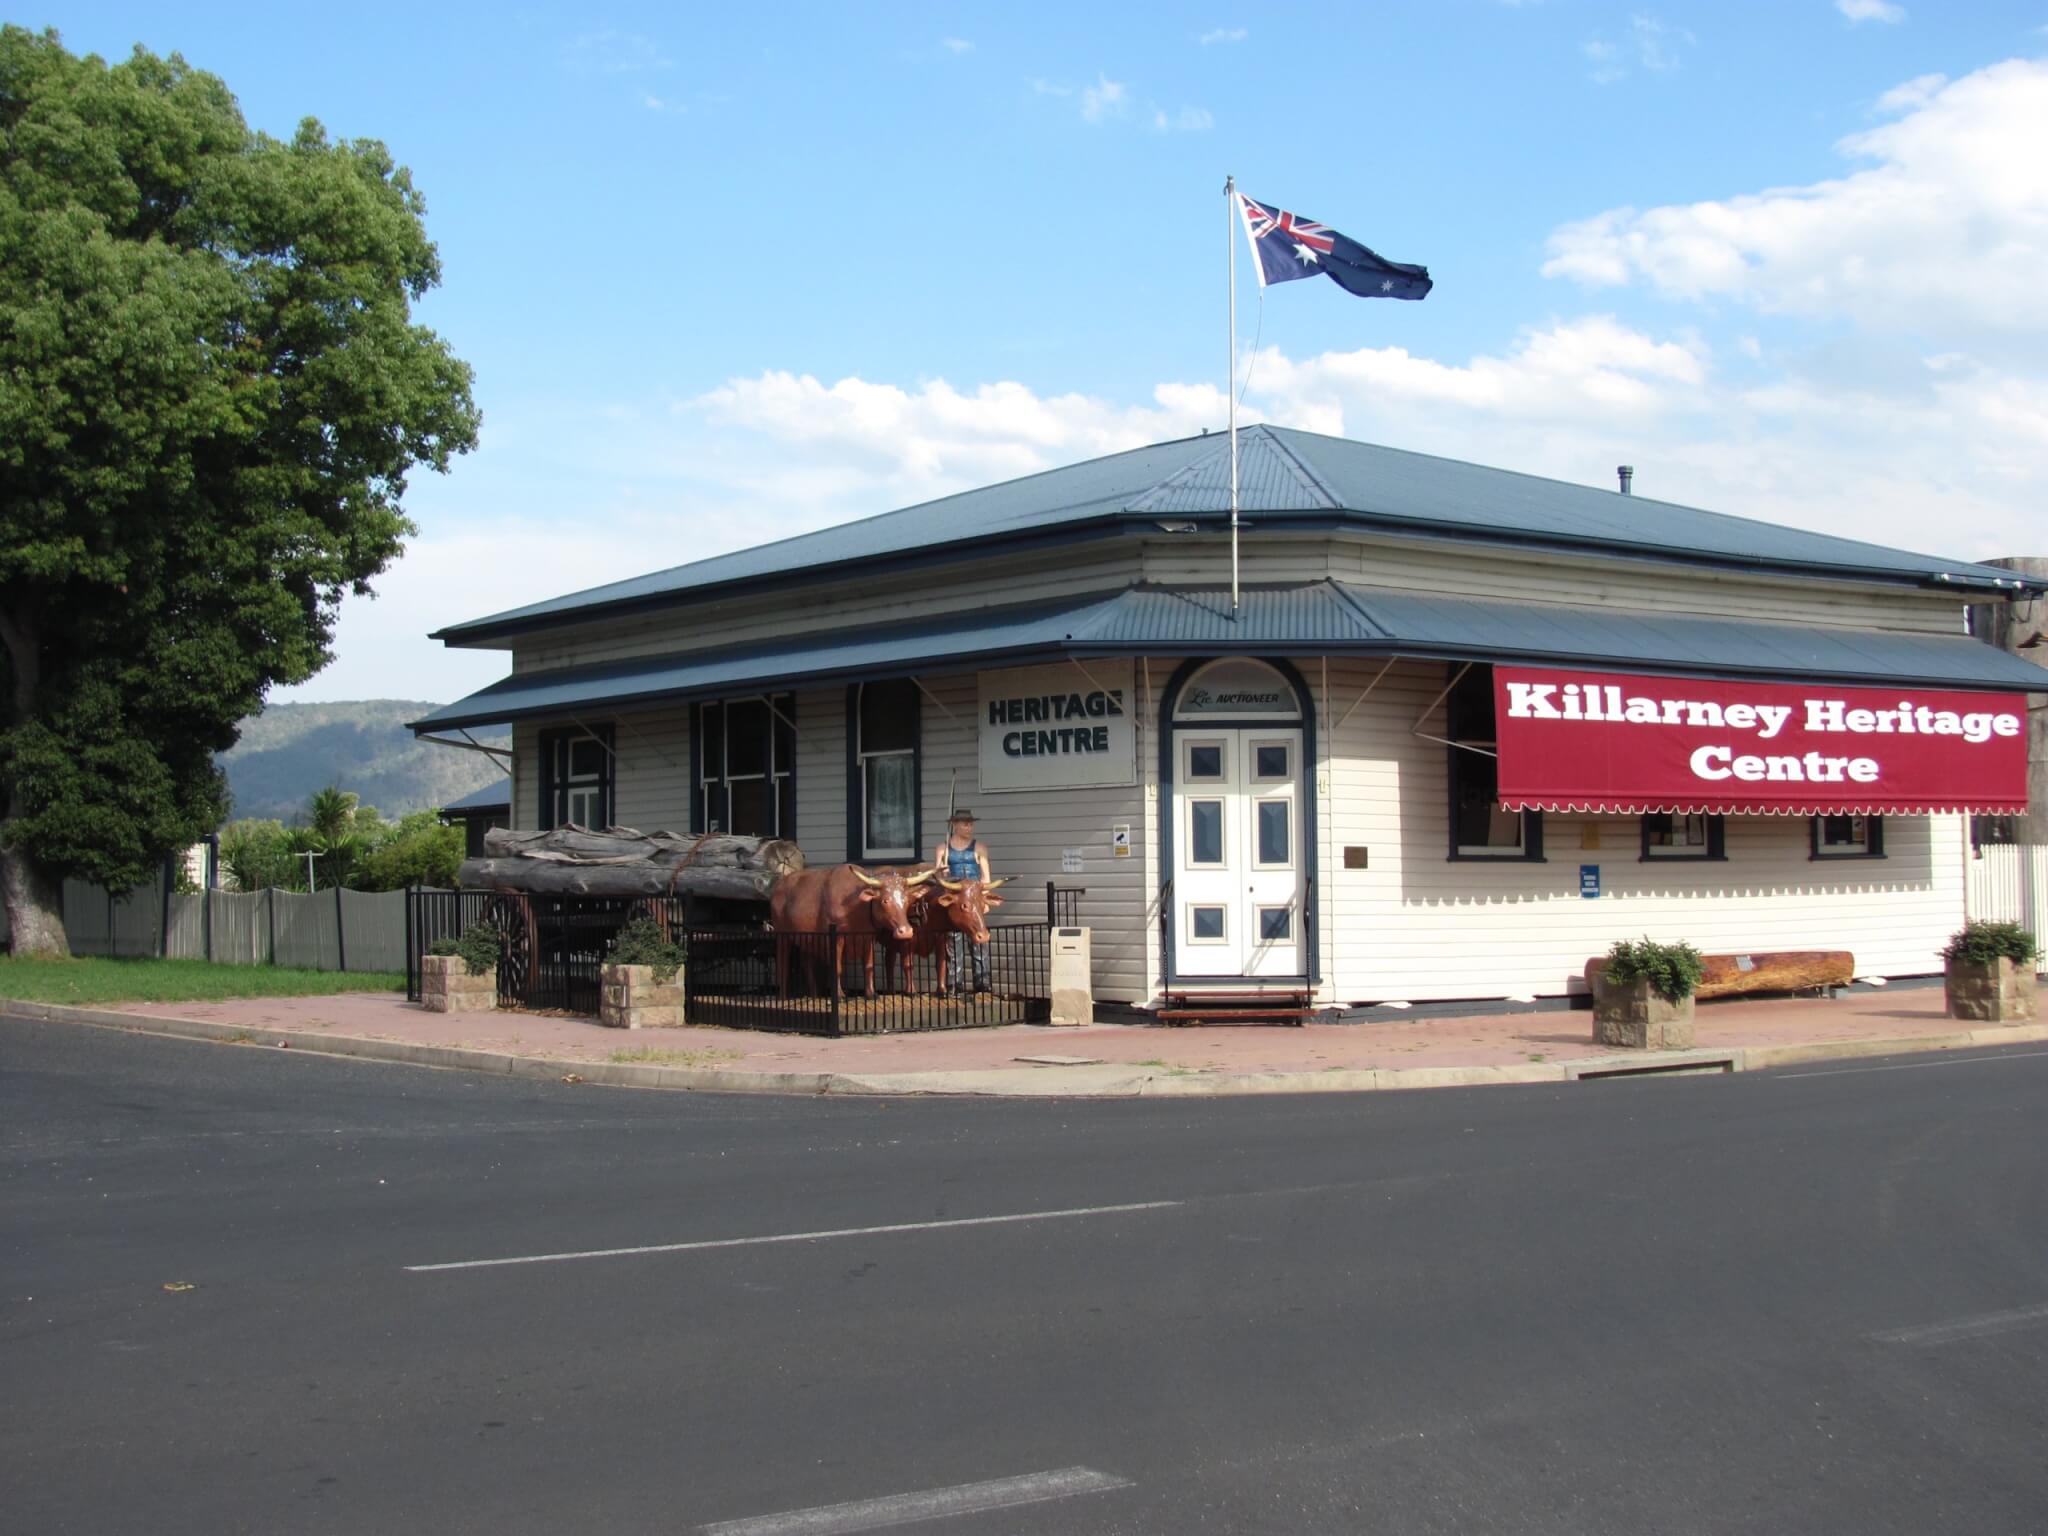 An outside view of Killarney Heritage Centre